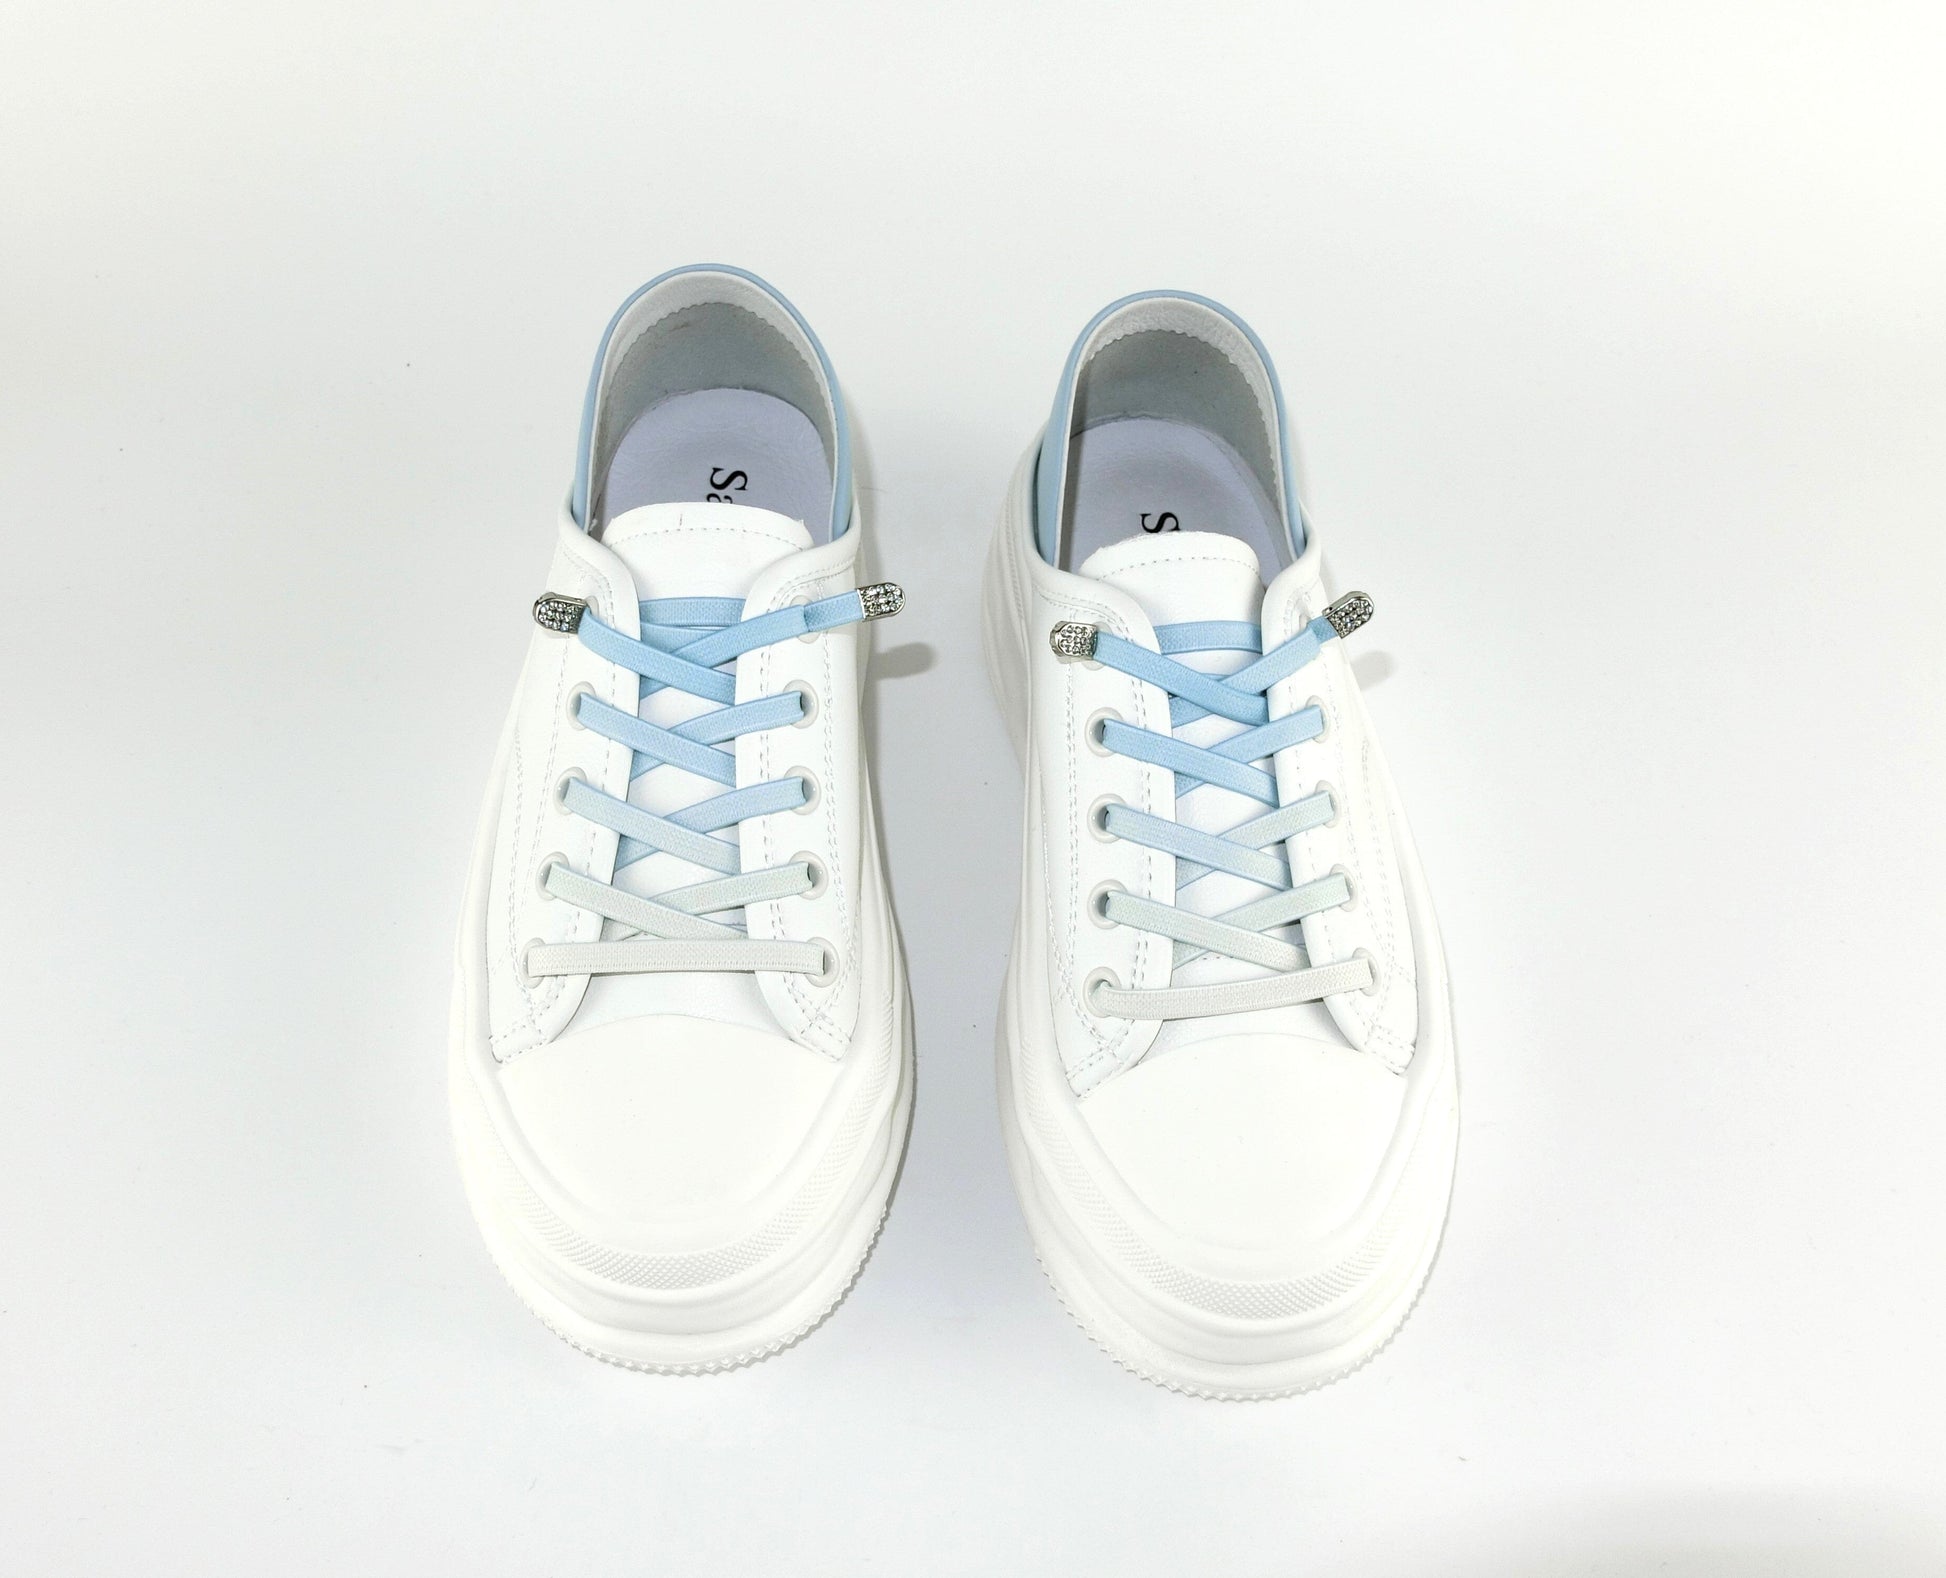 SS23003 Genuine leather white sneakers with cushions- Mint and Pale blue sneakers Sam Star Shoes White Blue 37/4 